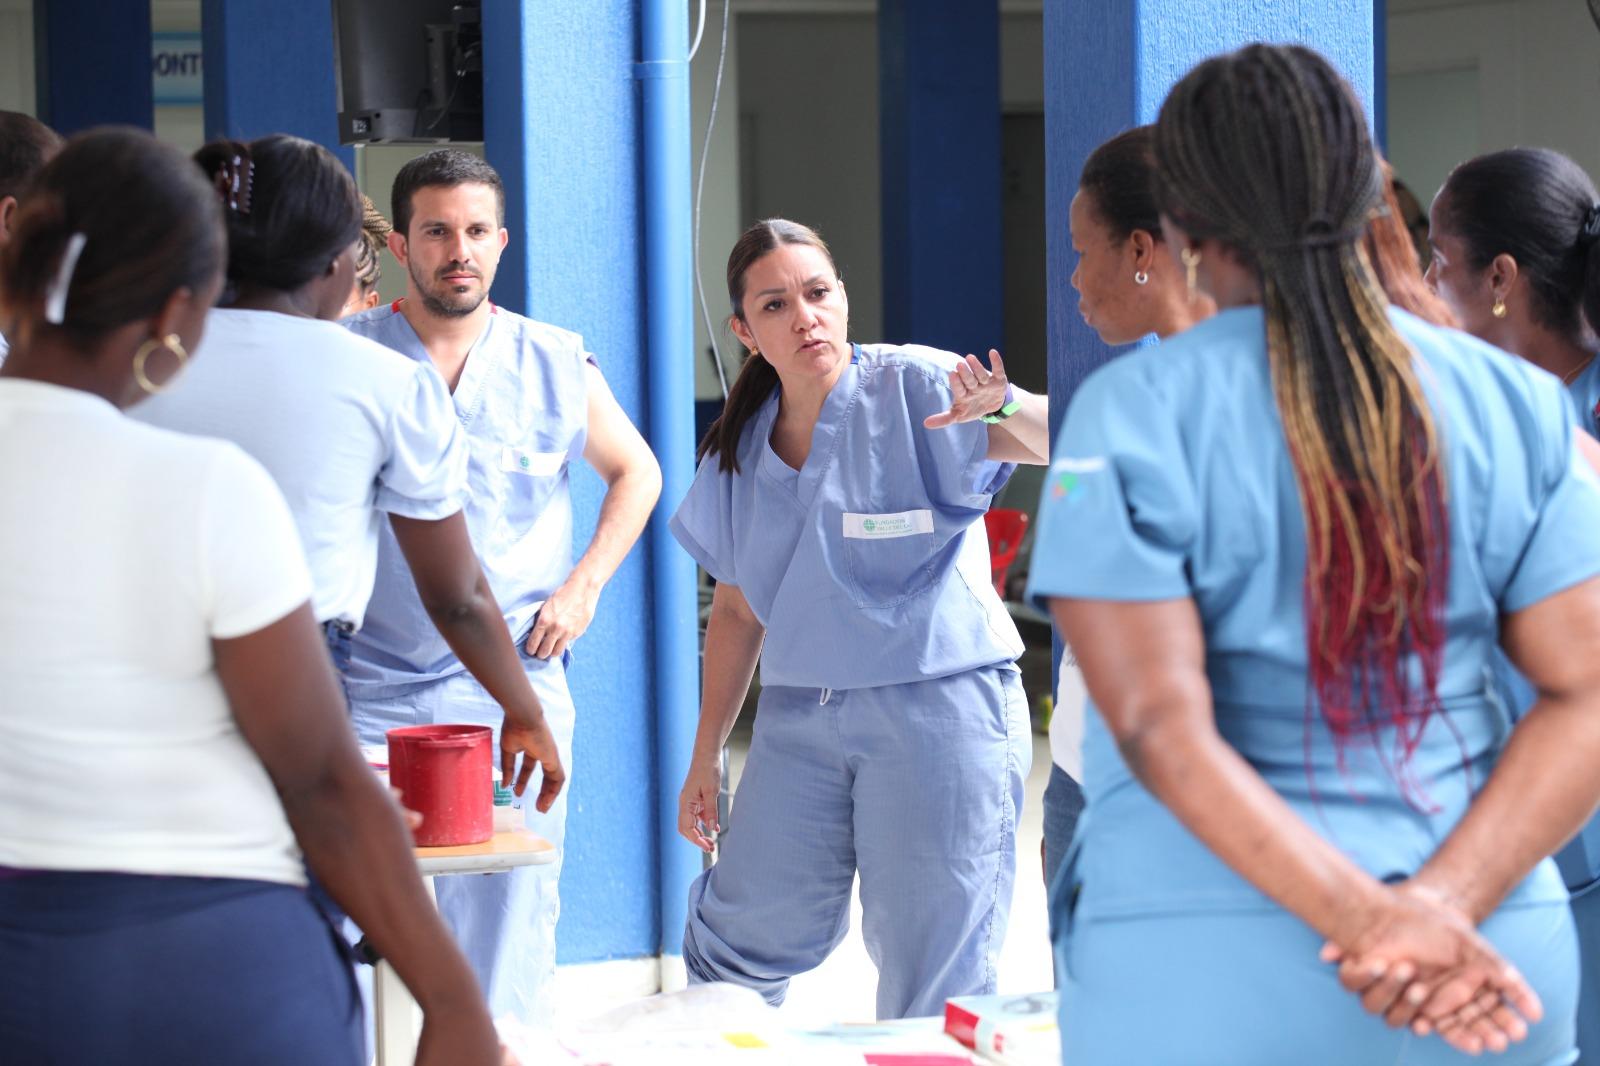 Members of the Hospital Padrino strategy provide training in obstetric emergencies.